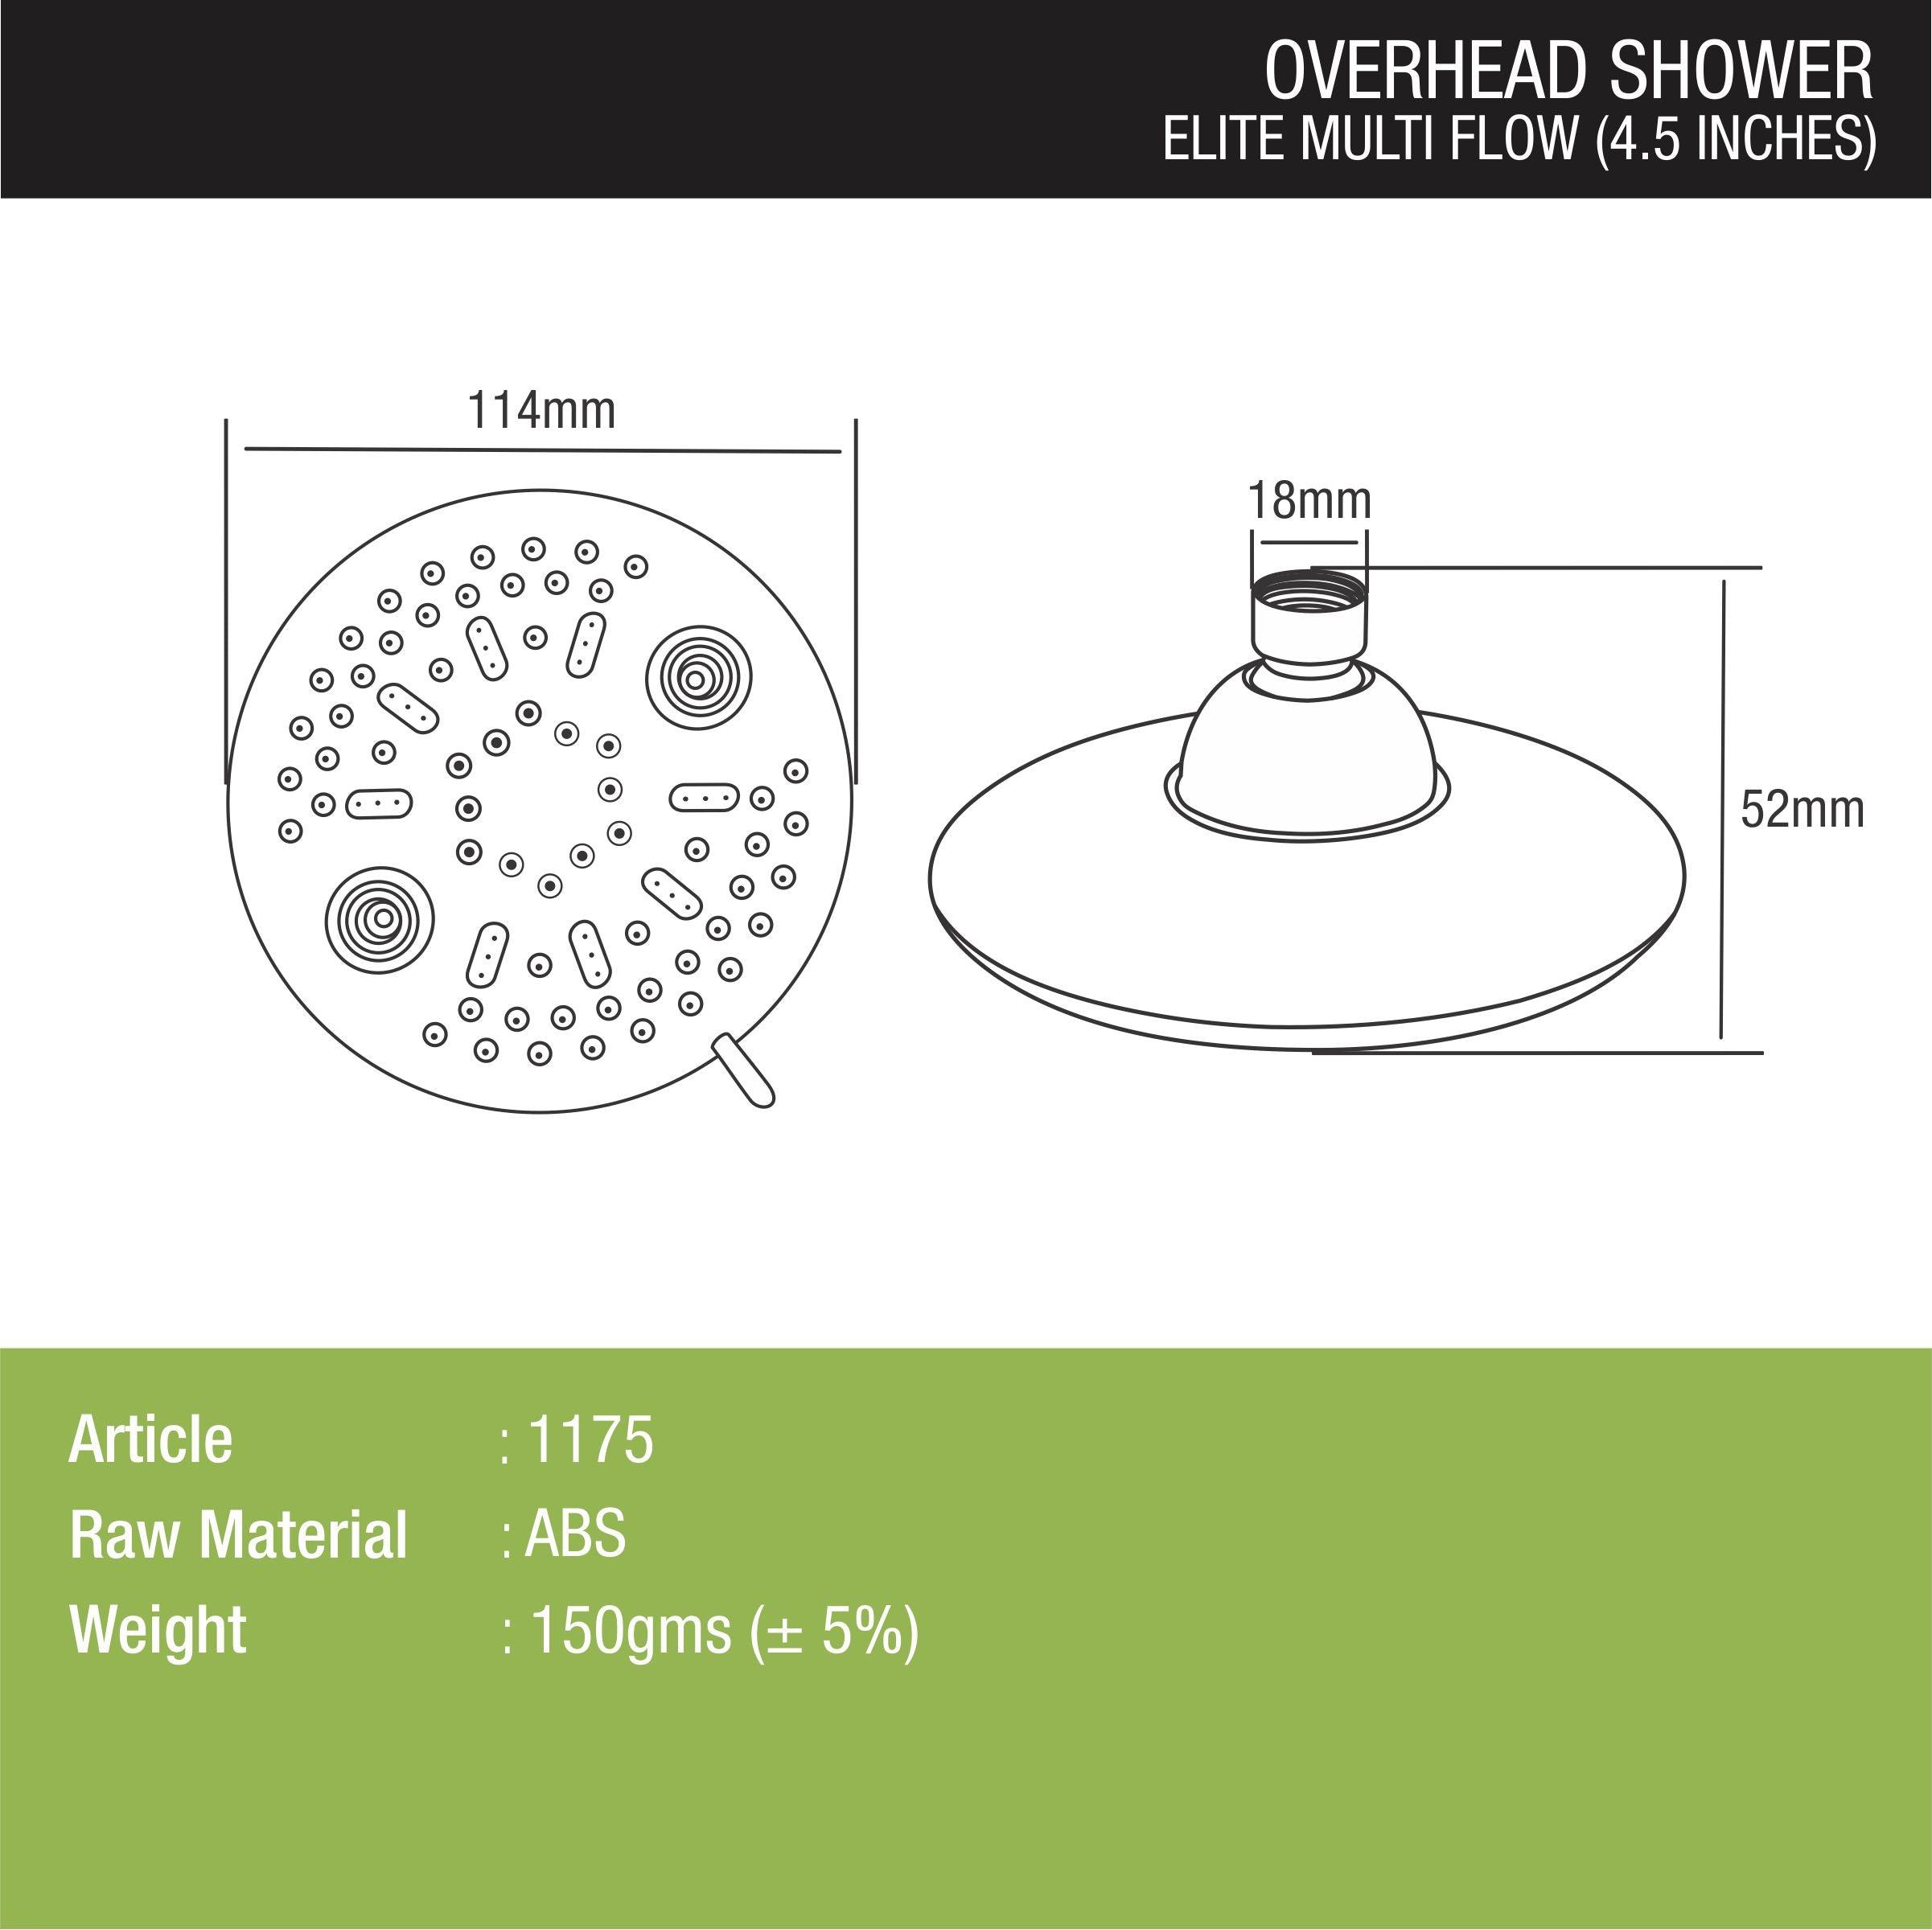 Elite Multiflow Overhead Shower dimensions and sizes